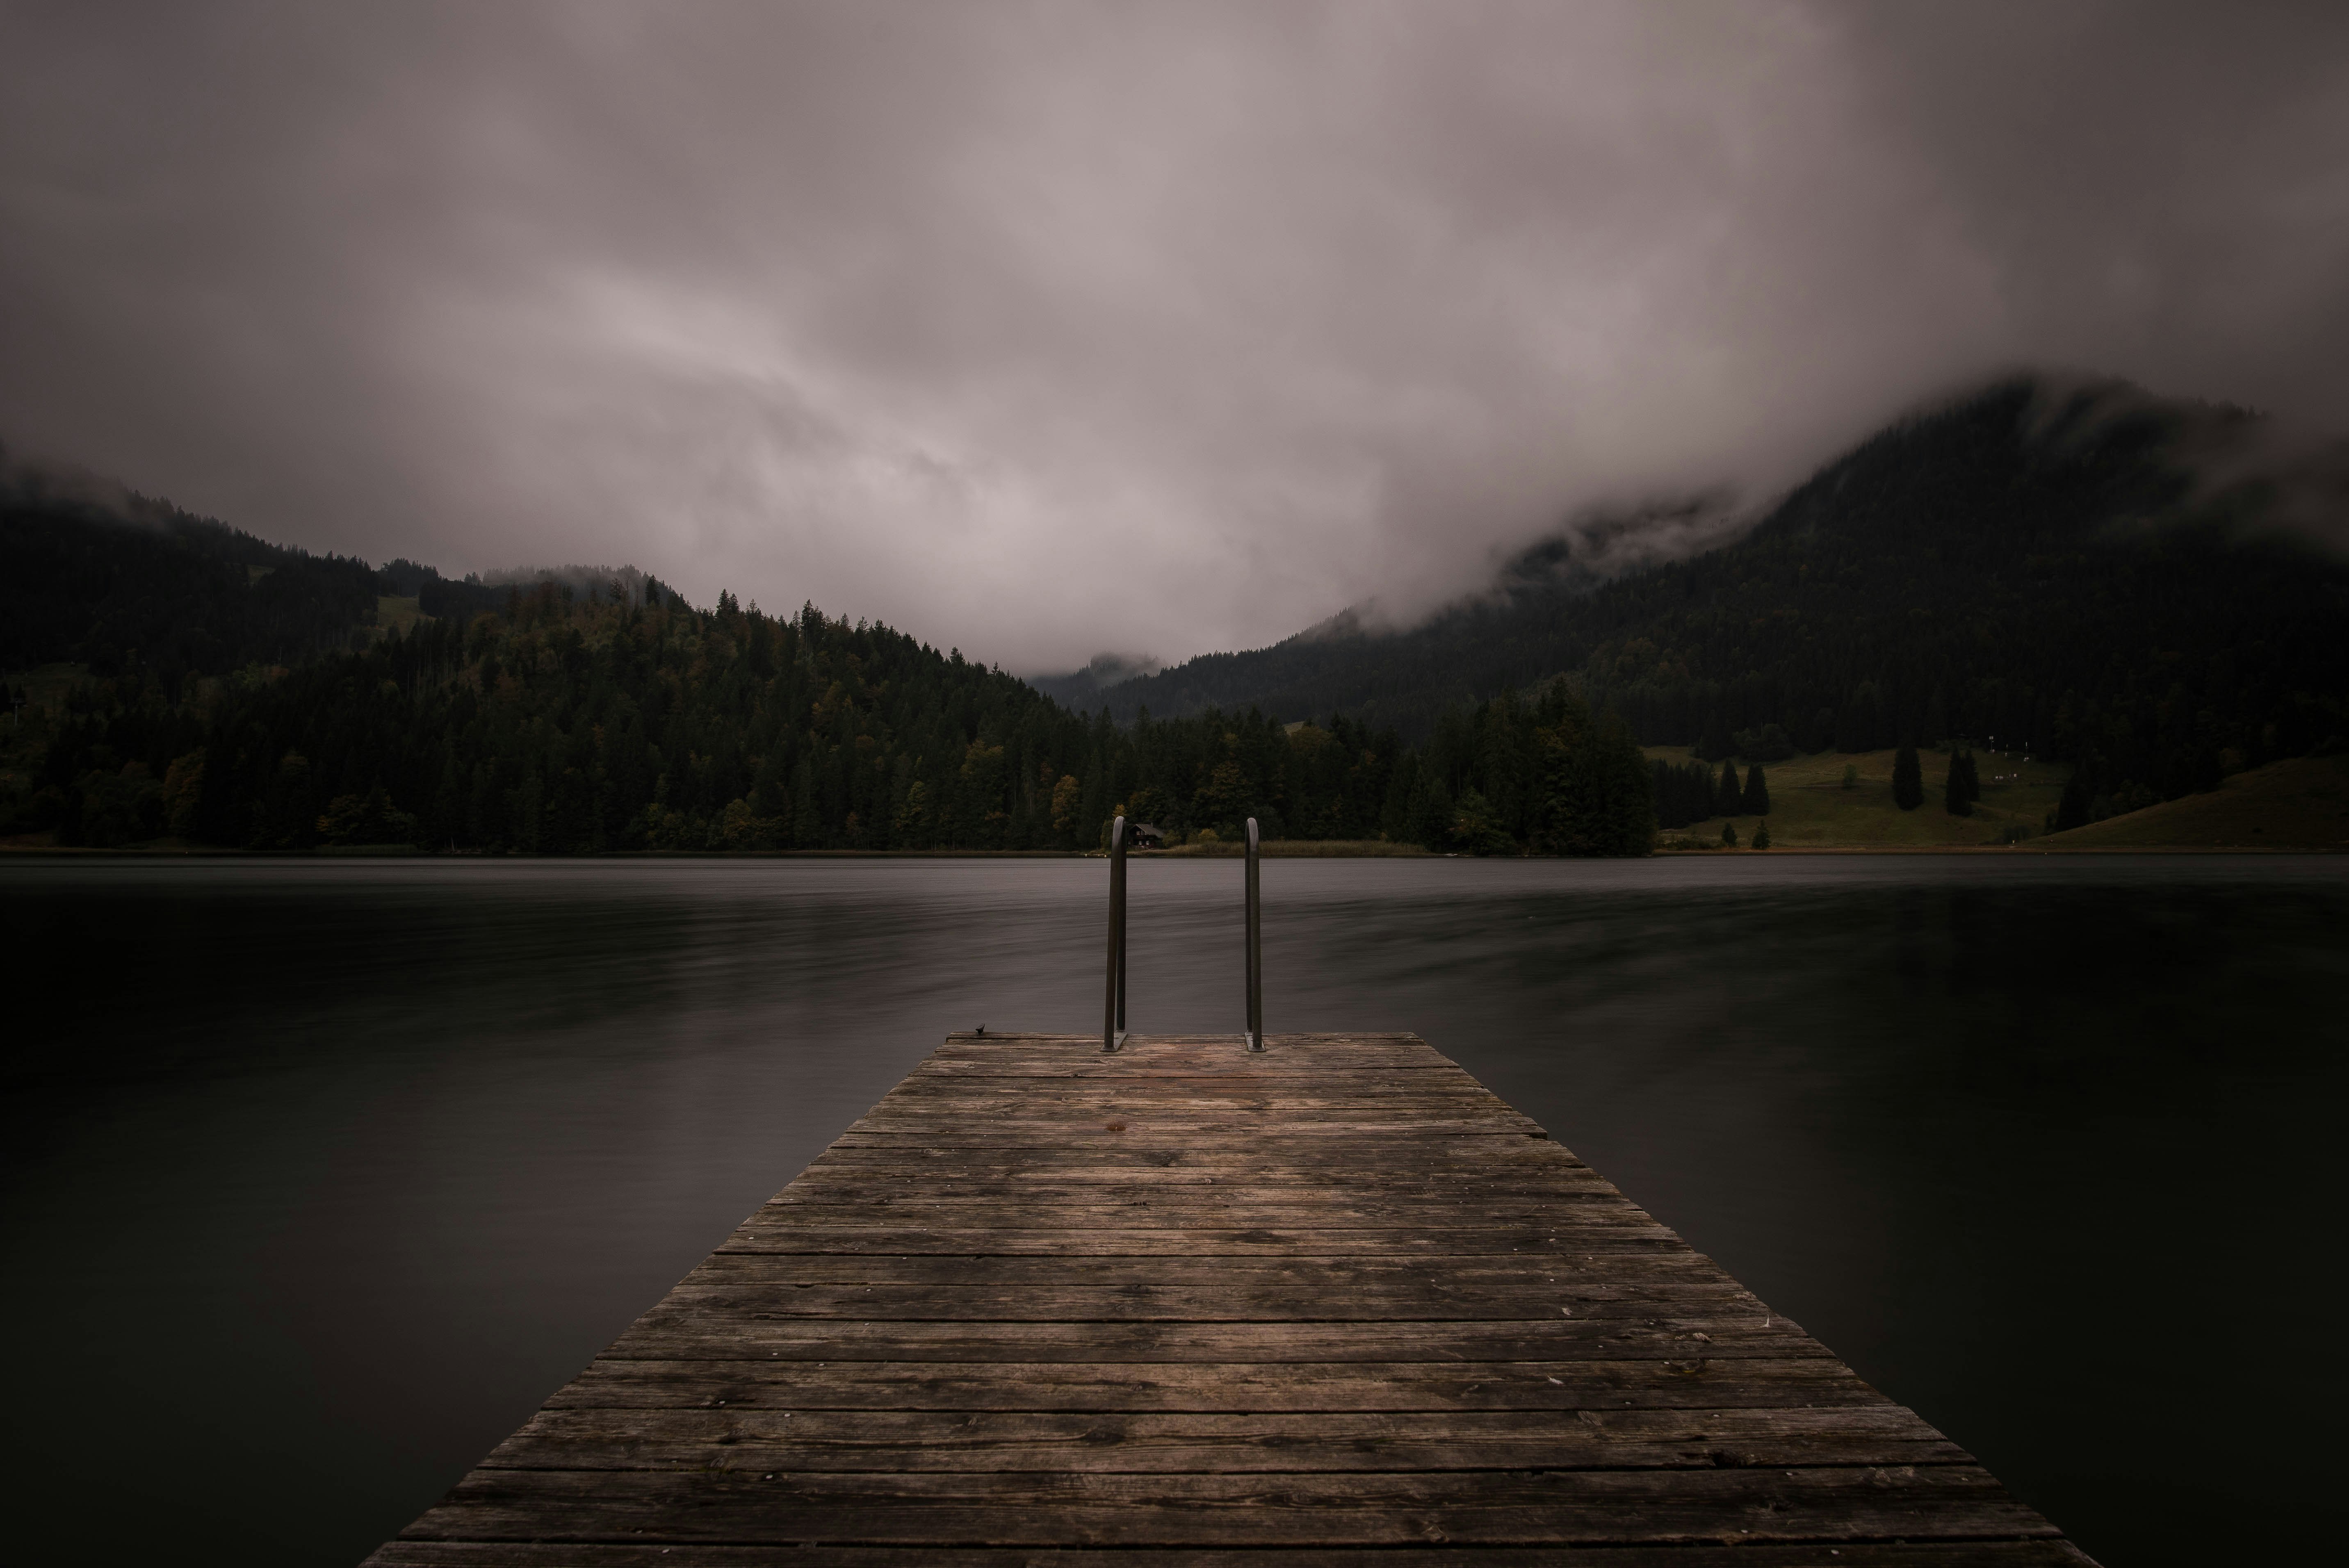 brown wooden dock near lake under cloudy sky